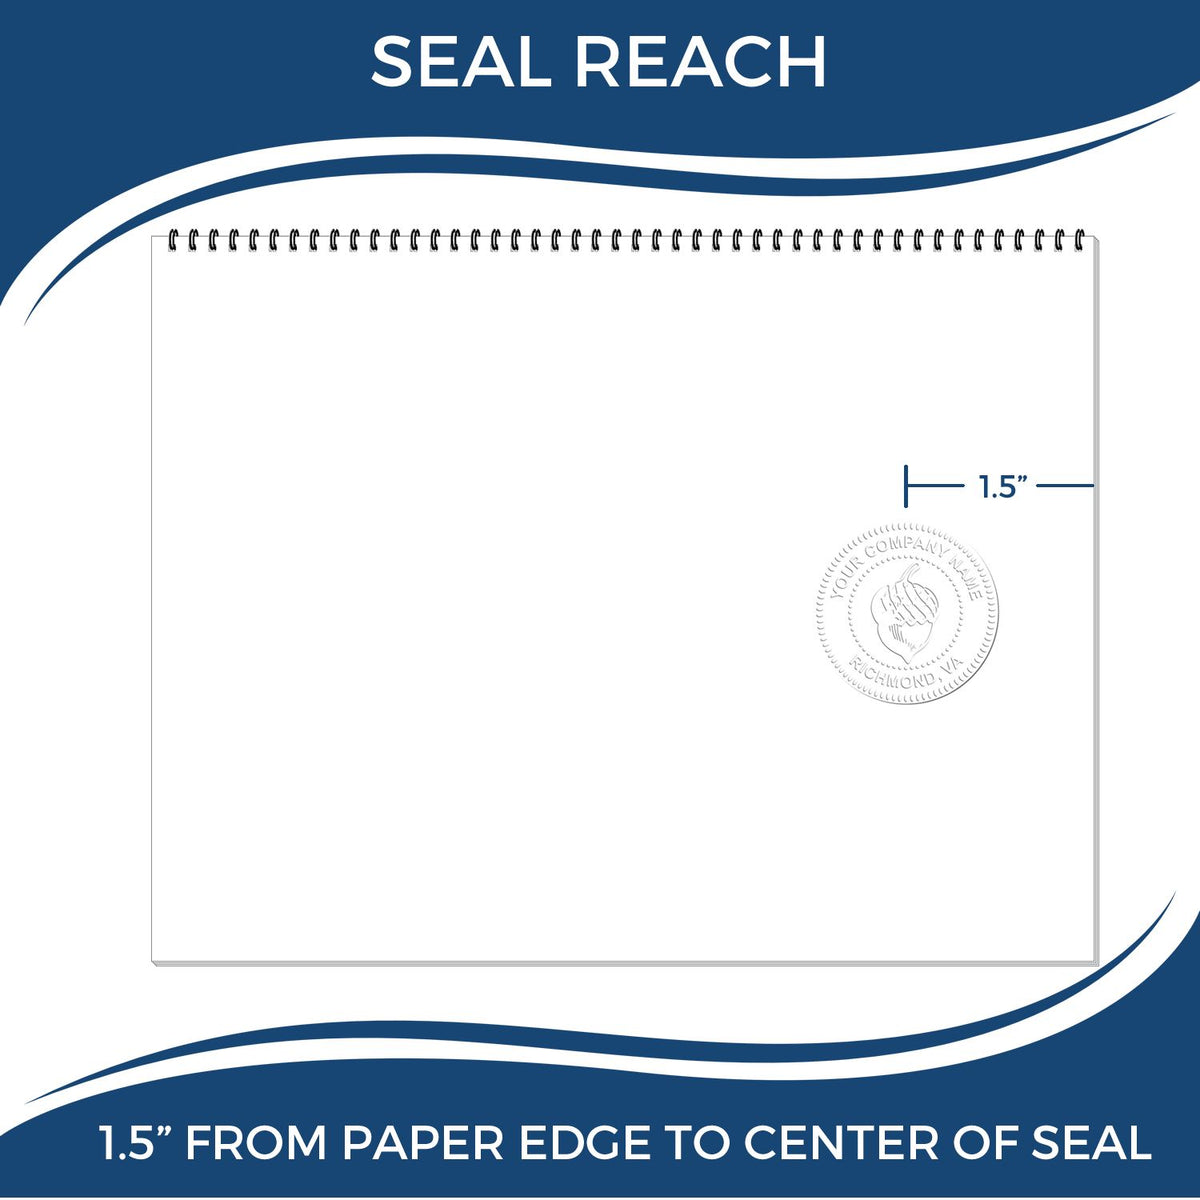 An infographic showing the seal reach which is represented by a ruler and a miniature seal image of the Soft Idaho Professional Engineer Seal